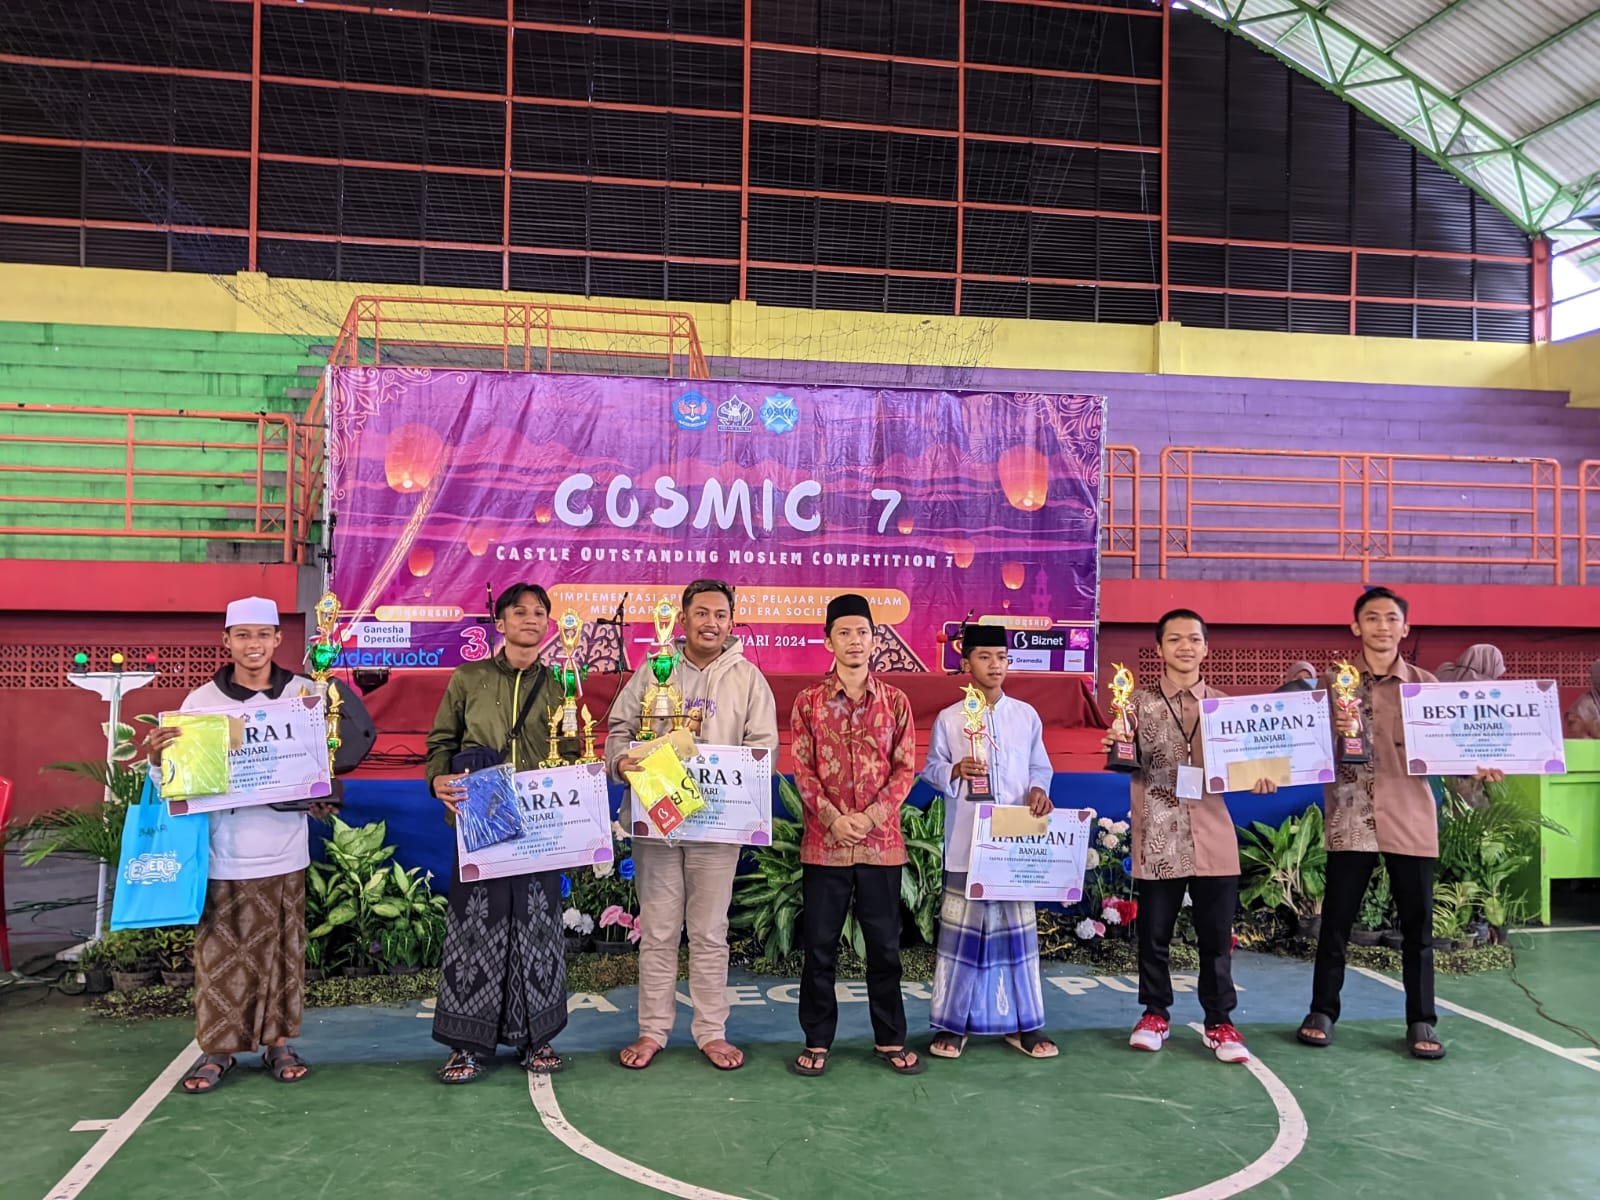 Castle Outstanding Moslem Competition (COSMIC) 7